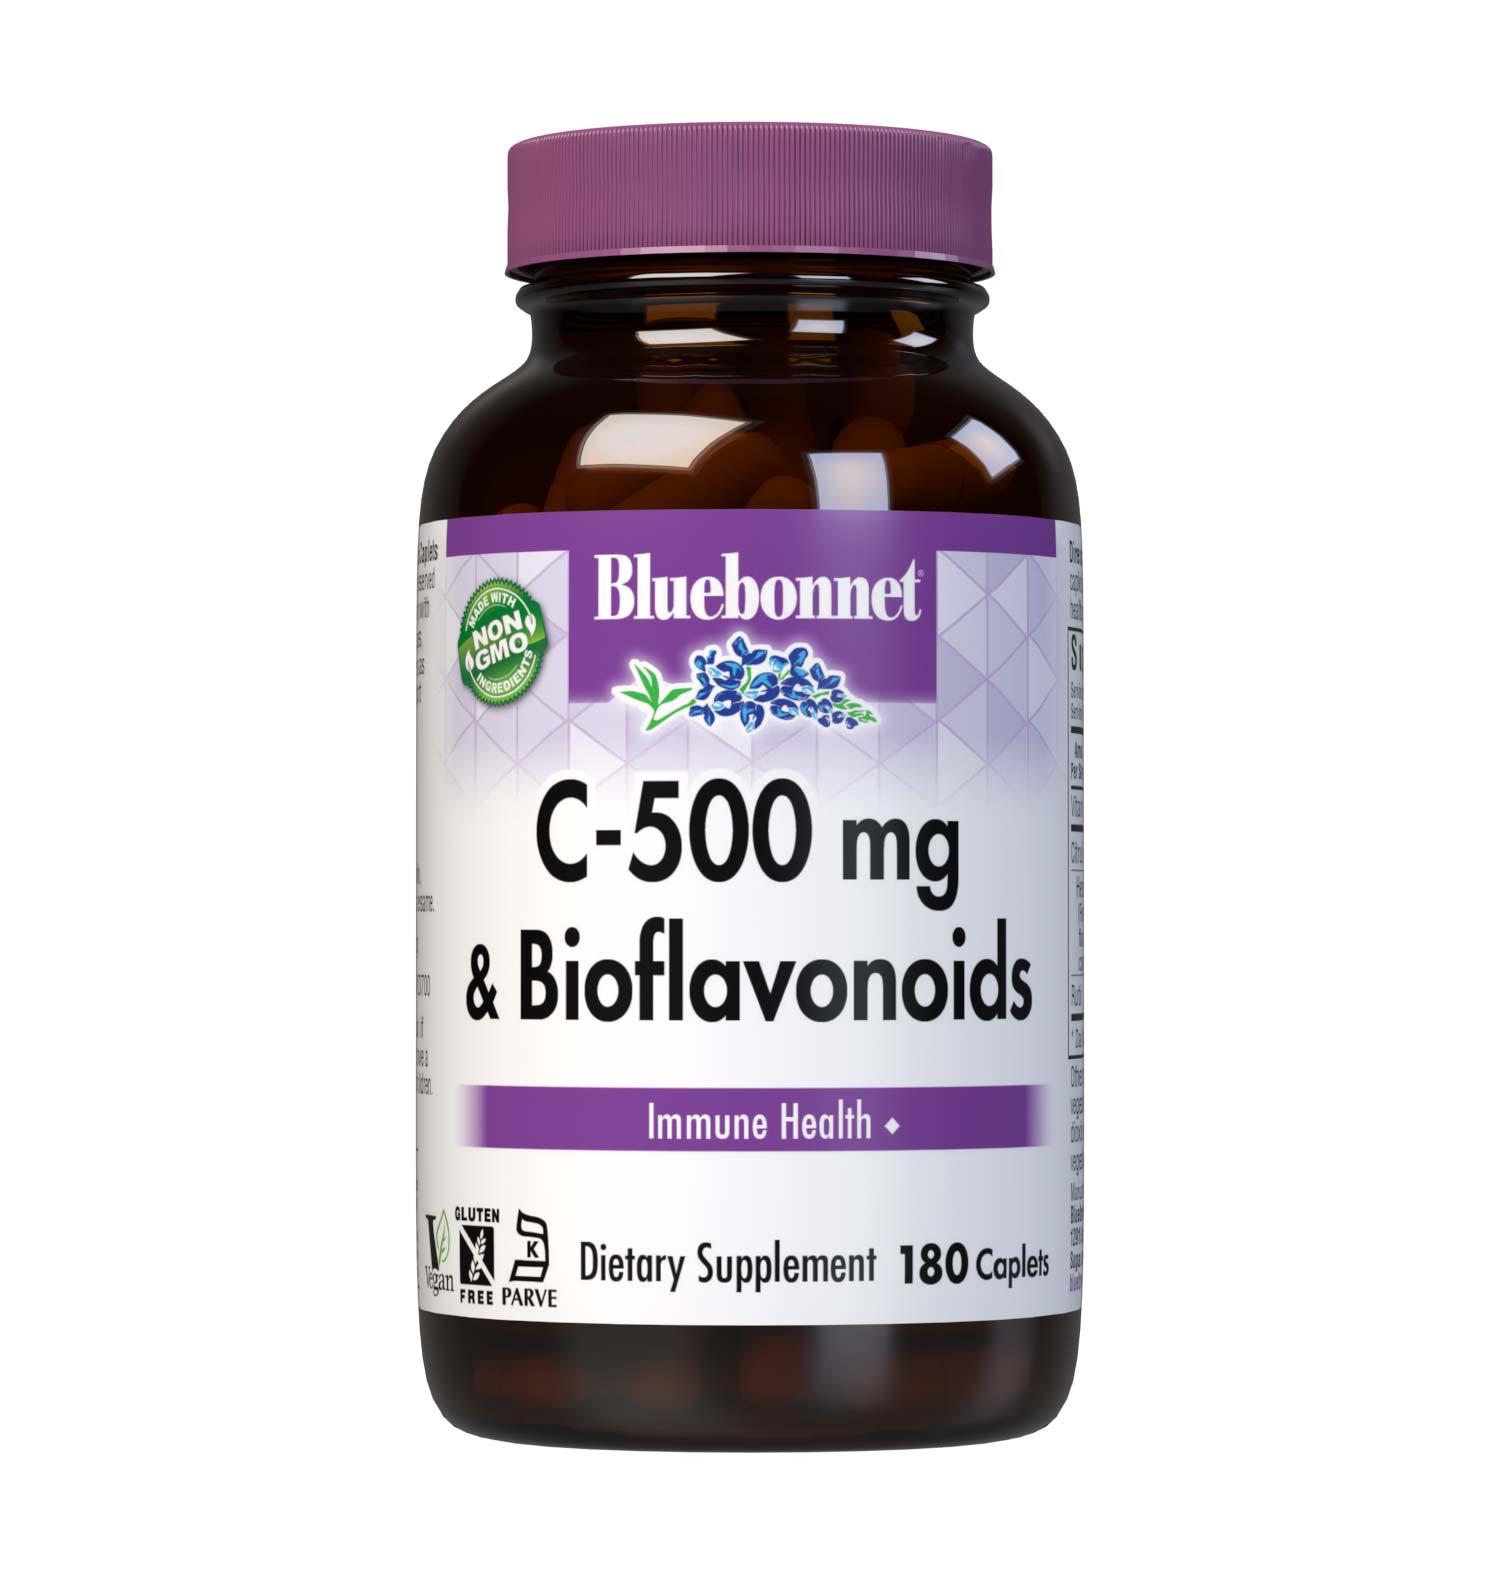 Bluebonnet’s C-500 mg & Bioflavonoids 180 Caplets are formulated with vitamin C from L-ascorbic acid that is (IP) identity-preserved and non-GMO with citrus bioflavonoids from oranges, lemons, tangerines, grapefruits and limes to help support immune health. #size_180 count